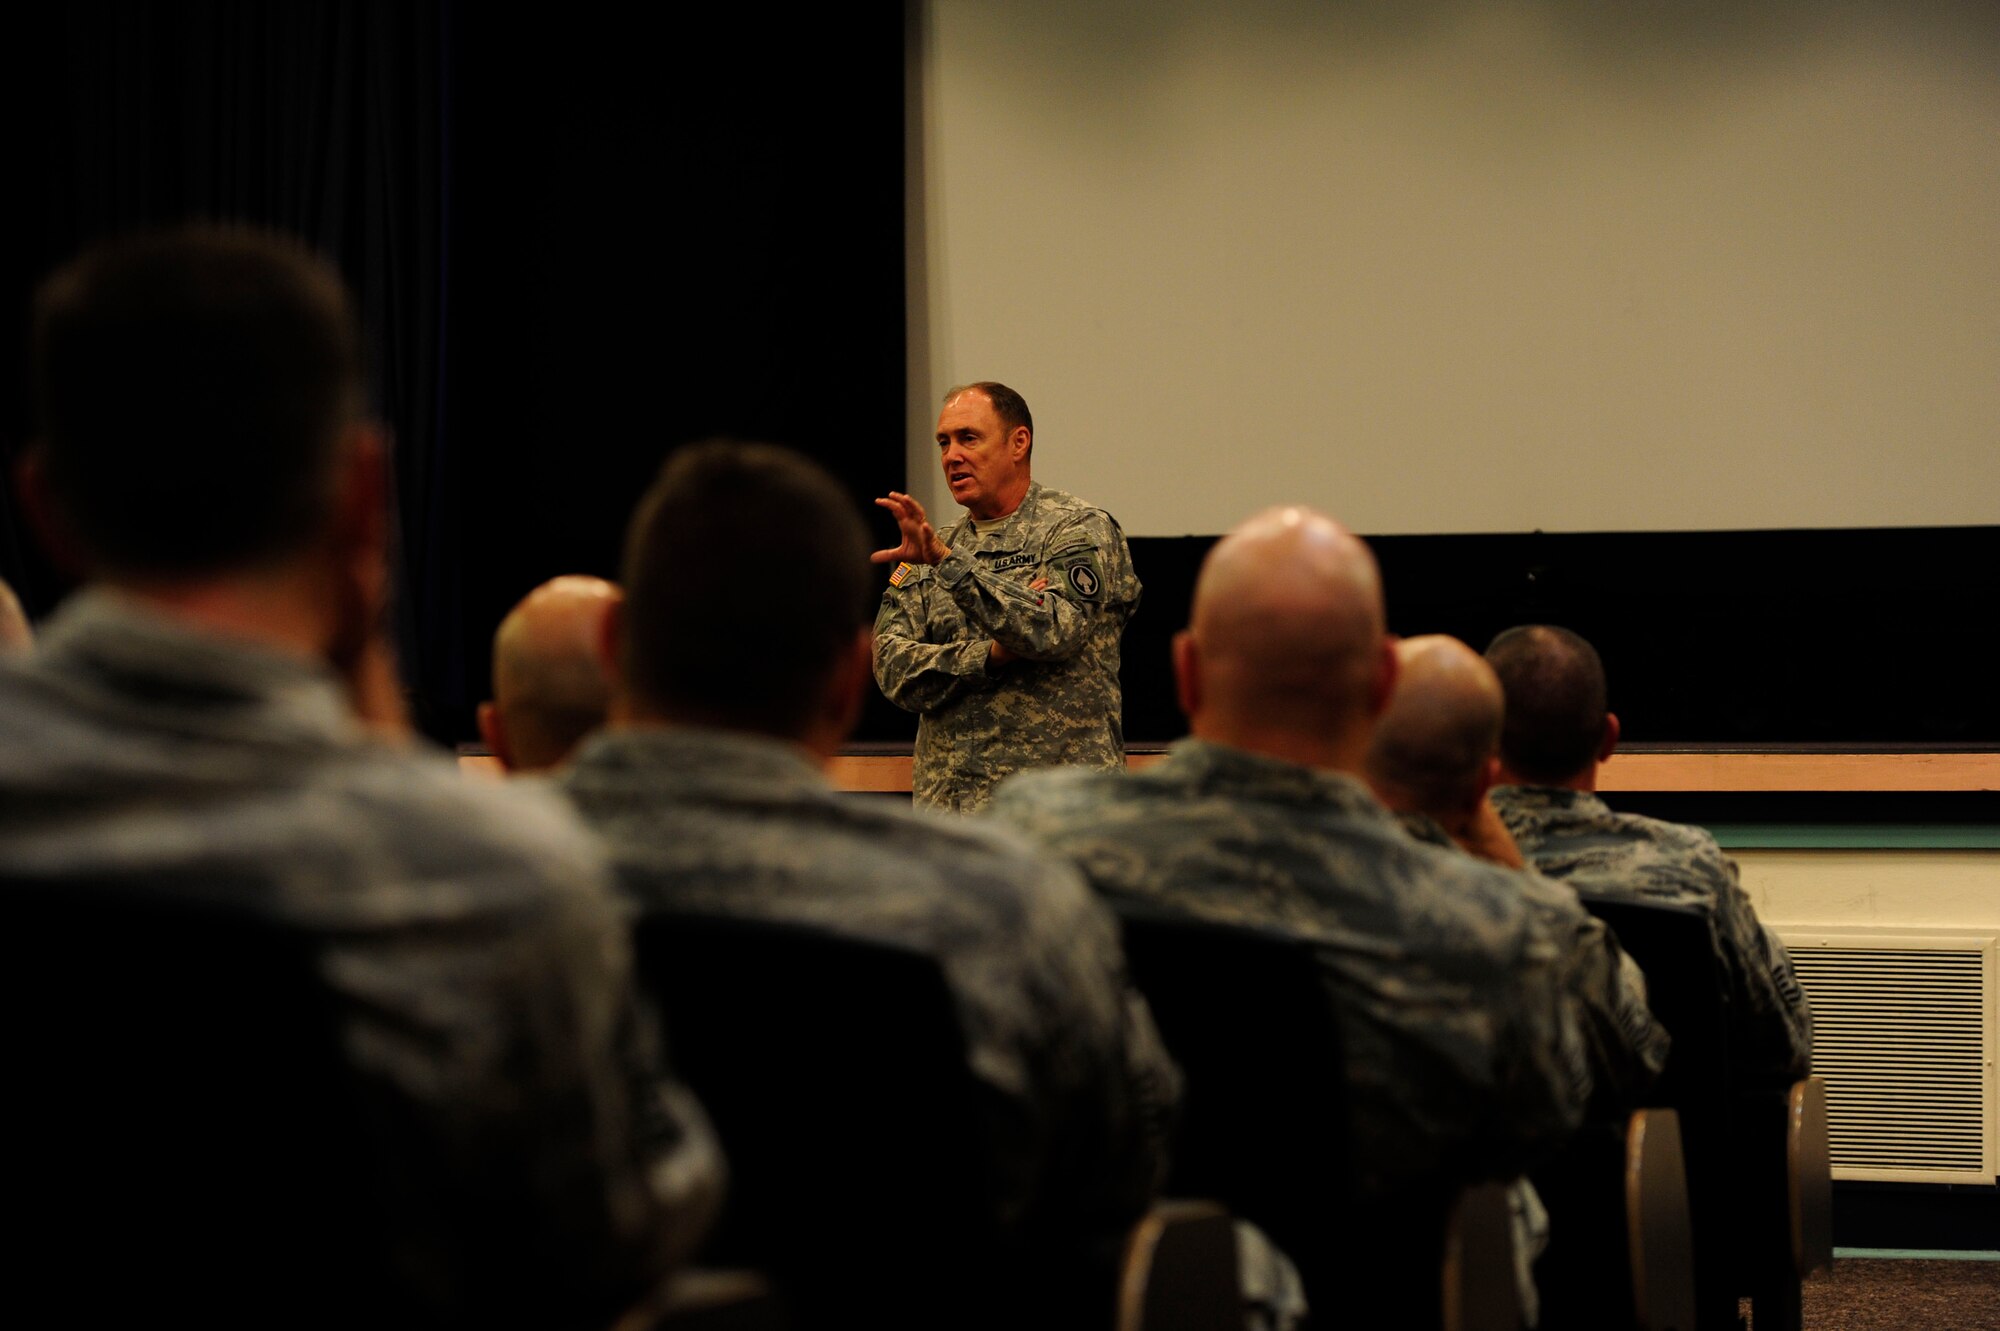 Army Command Sgt. Maj. Thomas Smith, senior enlisted adviser of the
U.S. Special Operations Command, speaks to senior enlisted Airmen at the
Commando Auditorium at Hurlburt Field, Fla., Sept.15, 2011. Smith briefed
the audience about the pressures facing the special operations community, as
well as the technological changes he has witnessed over the course of his
nearly 35-year military career. (U.S. Air Force photo/Airman Naomi
Griego)
